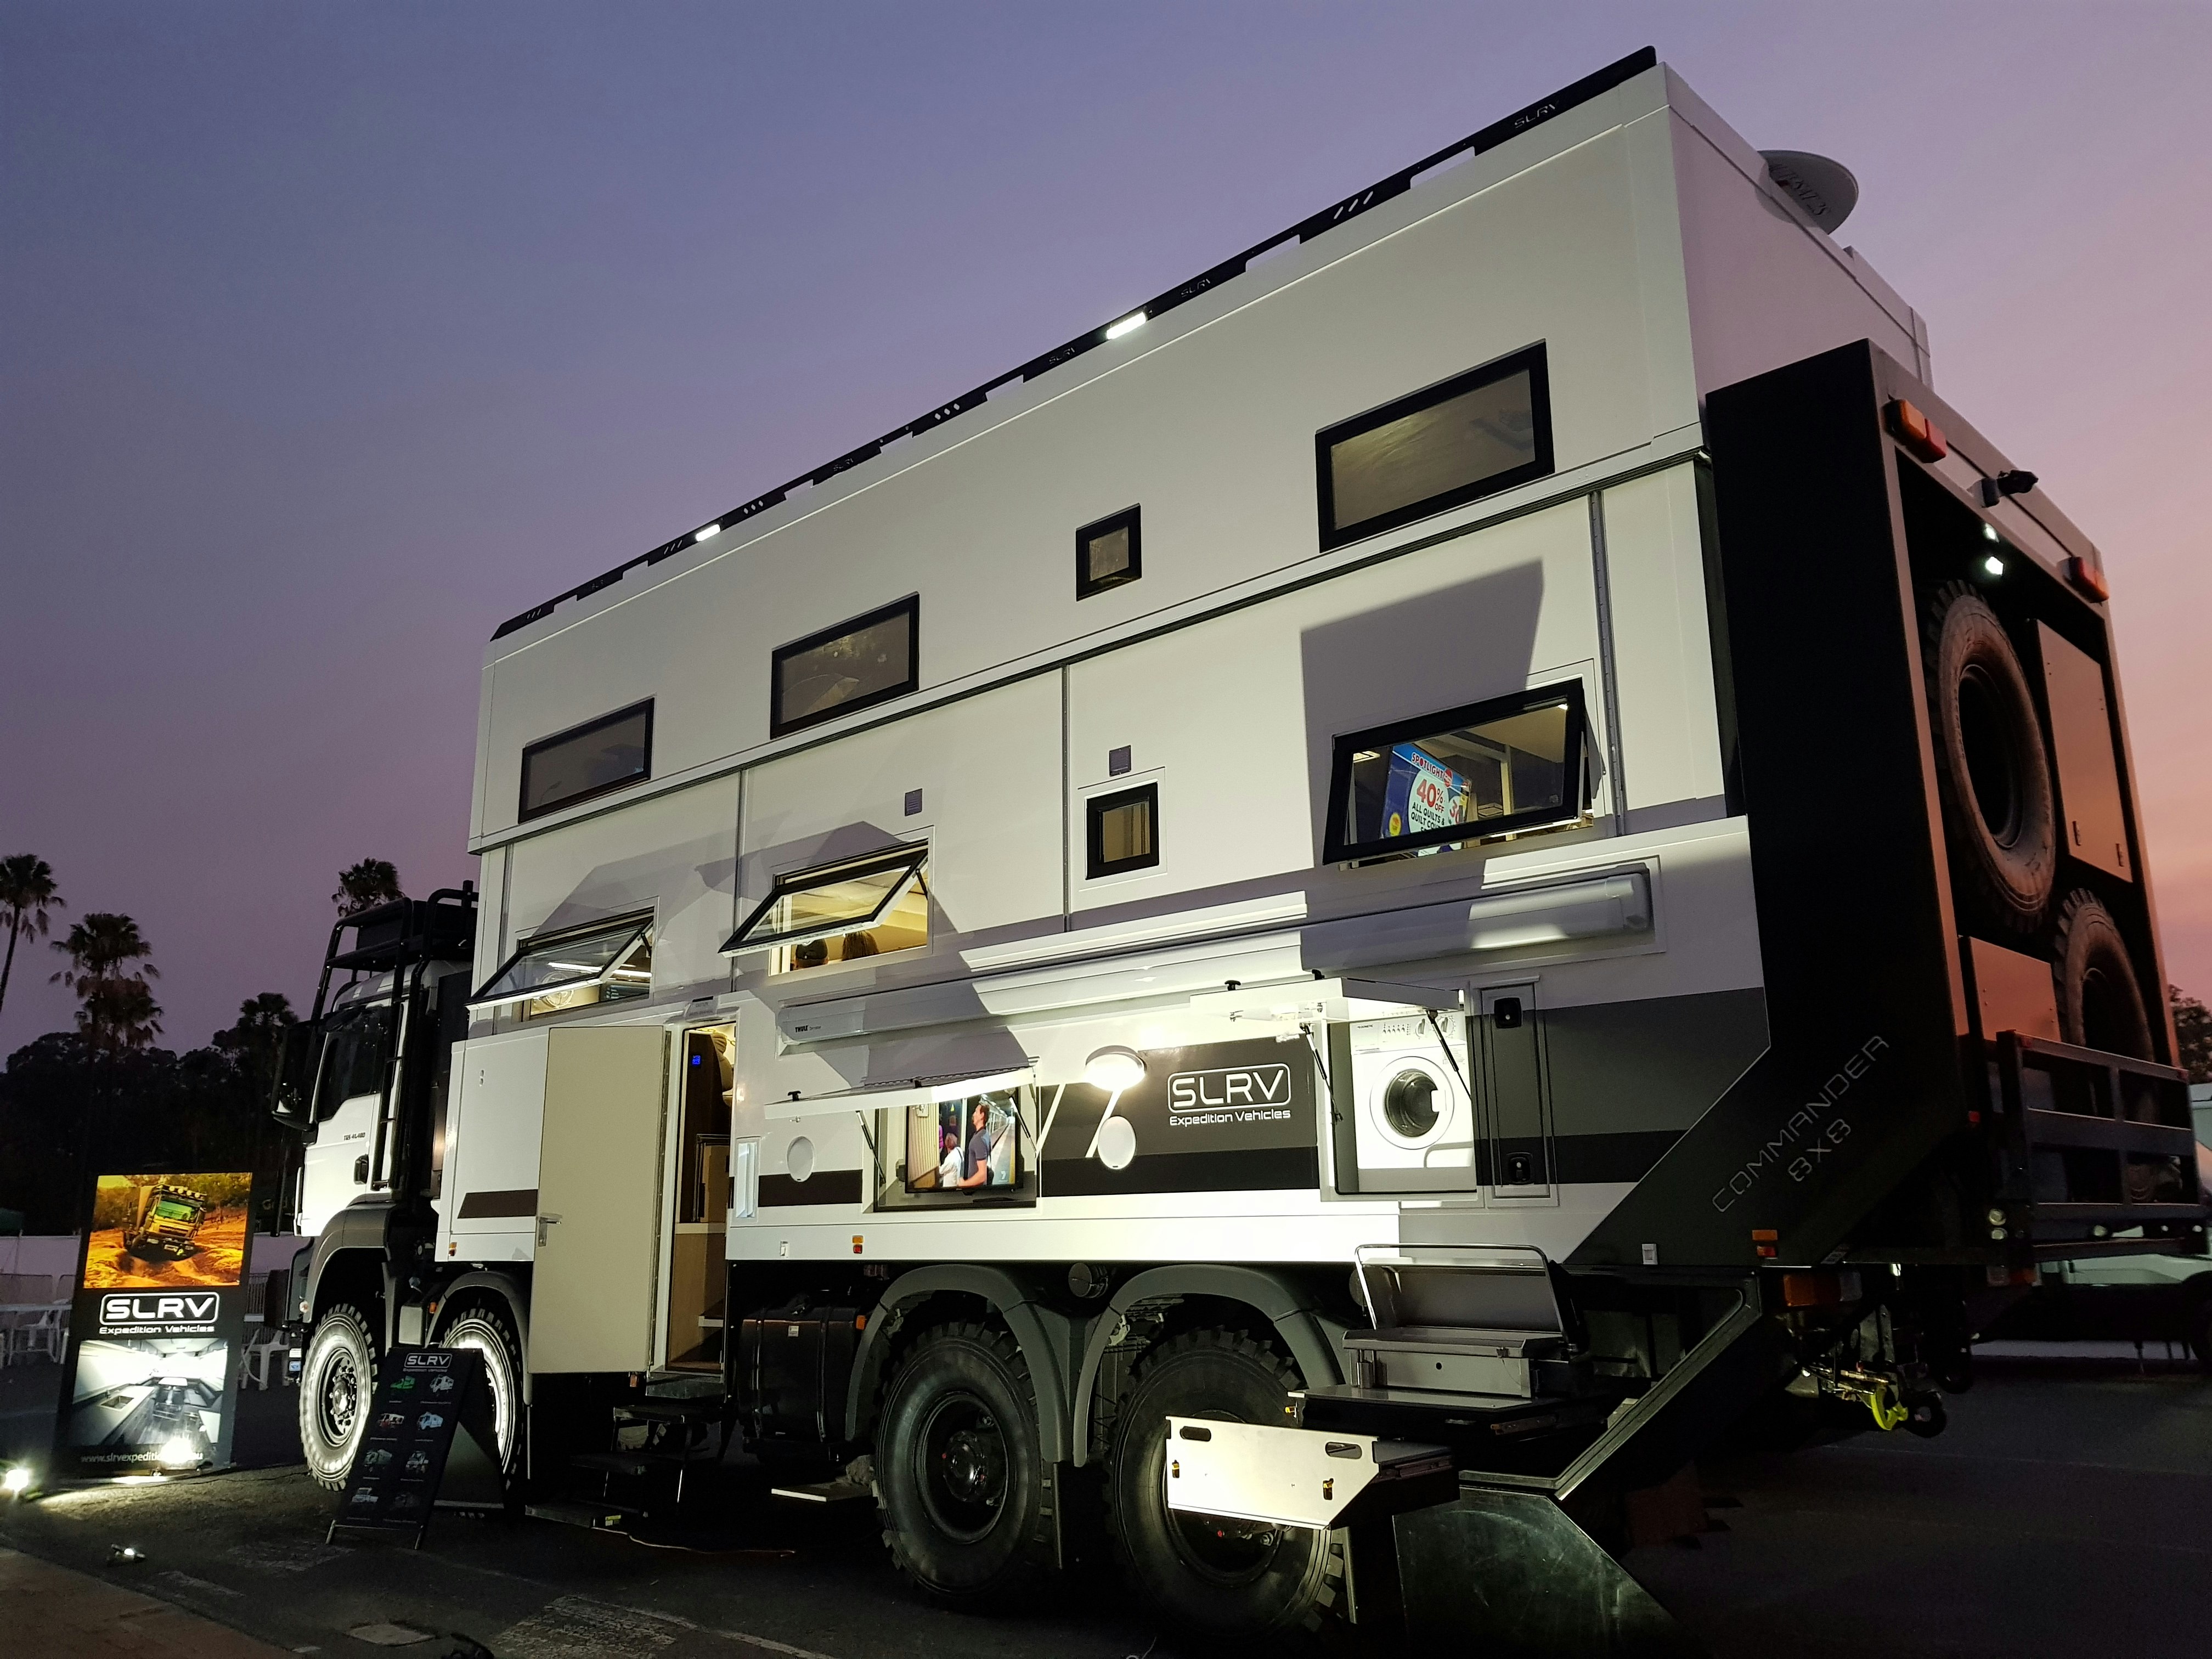 The exterior of a two-storey, eight-wheel drive expedition vehicle